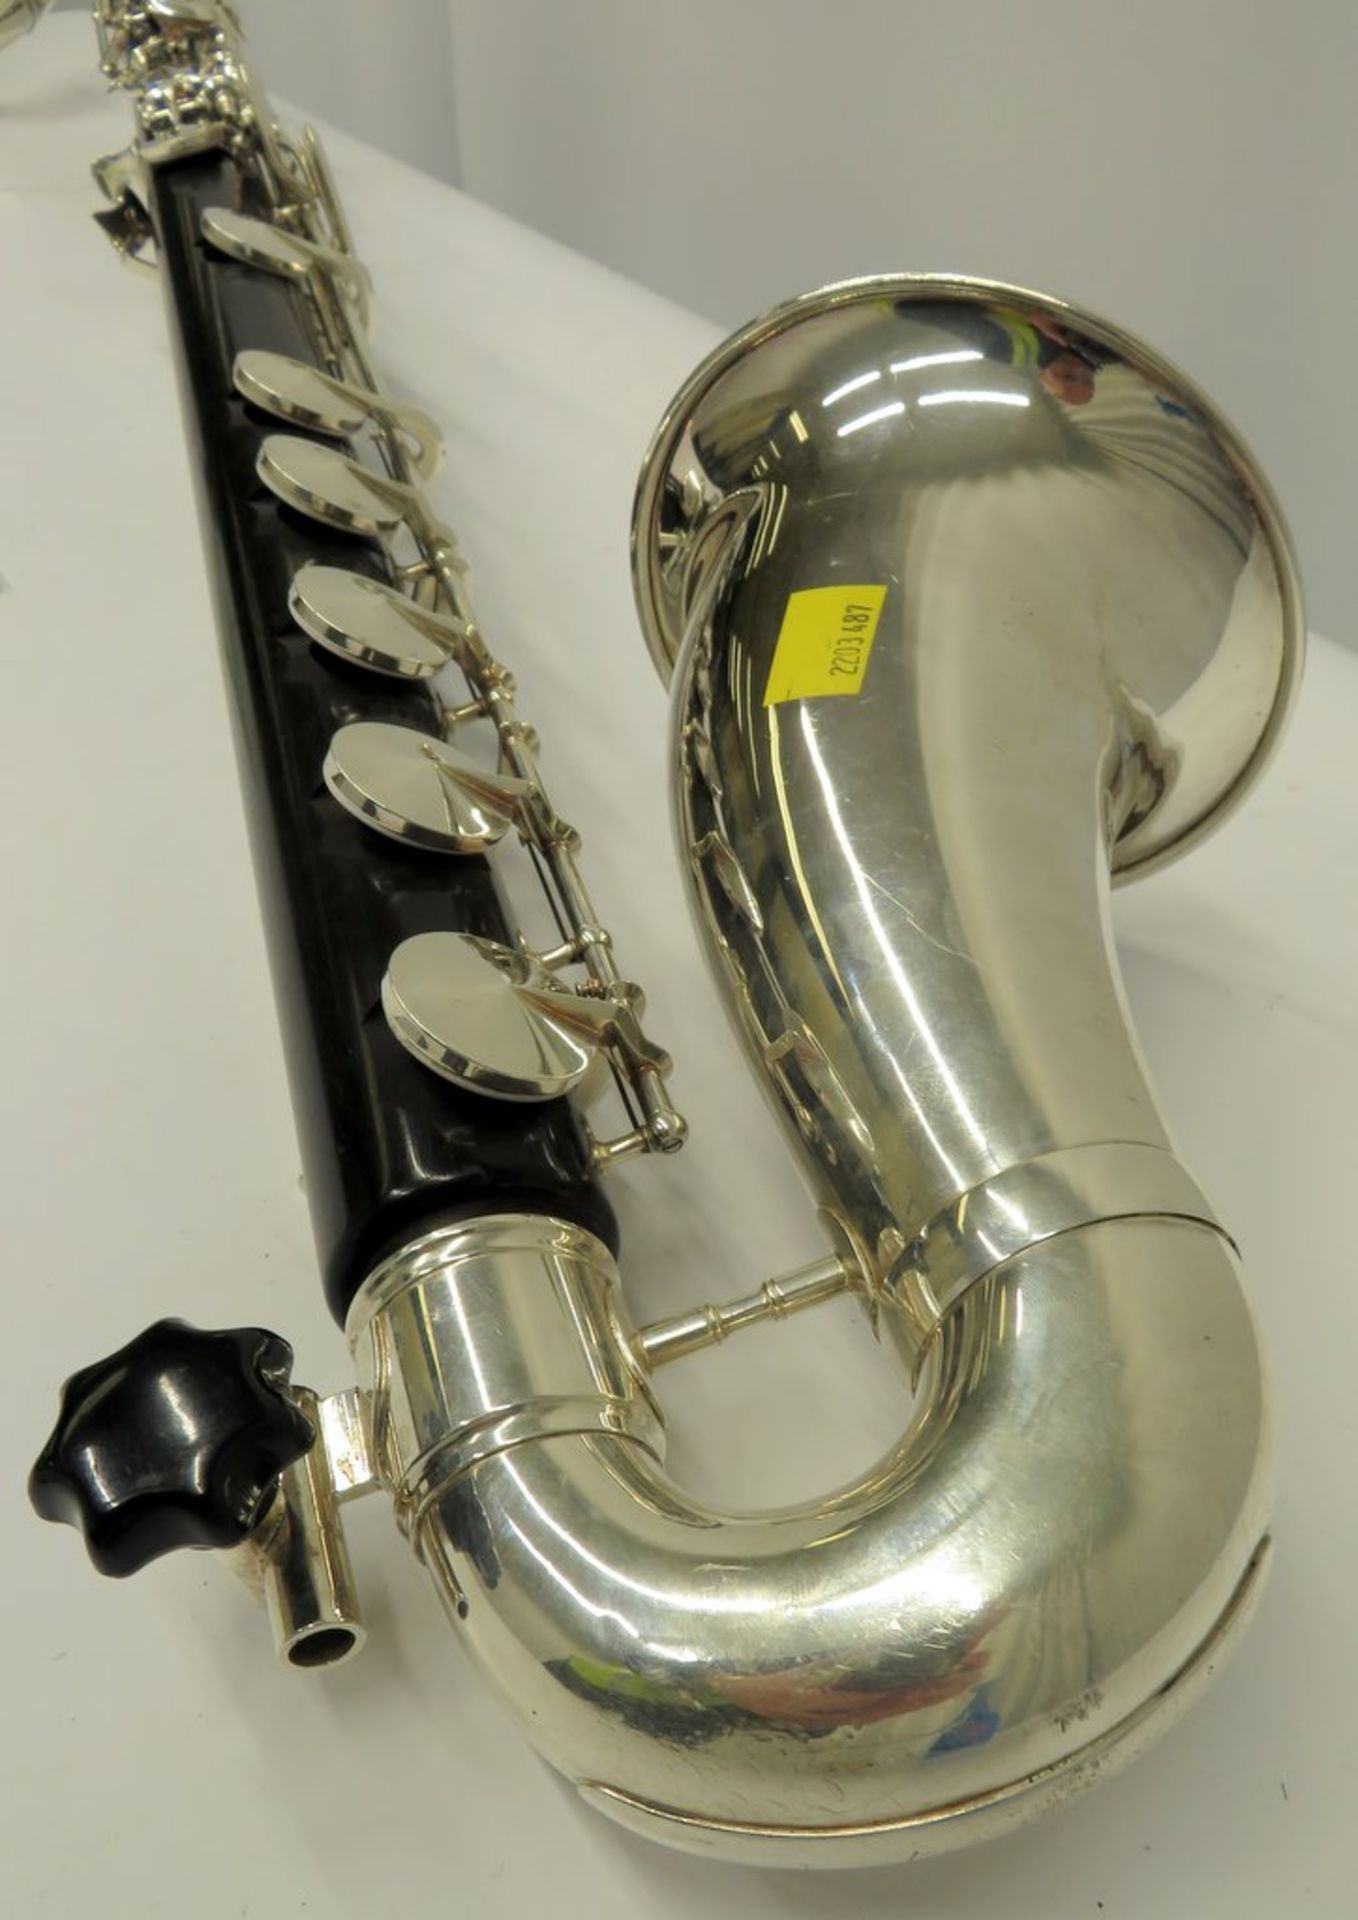 Buffet Crampon Prestige Bass Clarinet Complete With Case. - Image 22 of 25